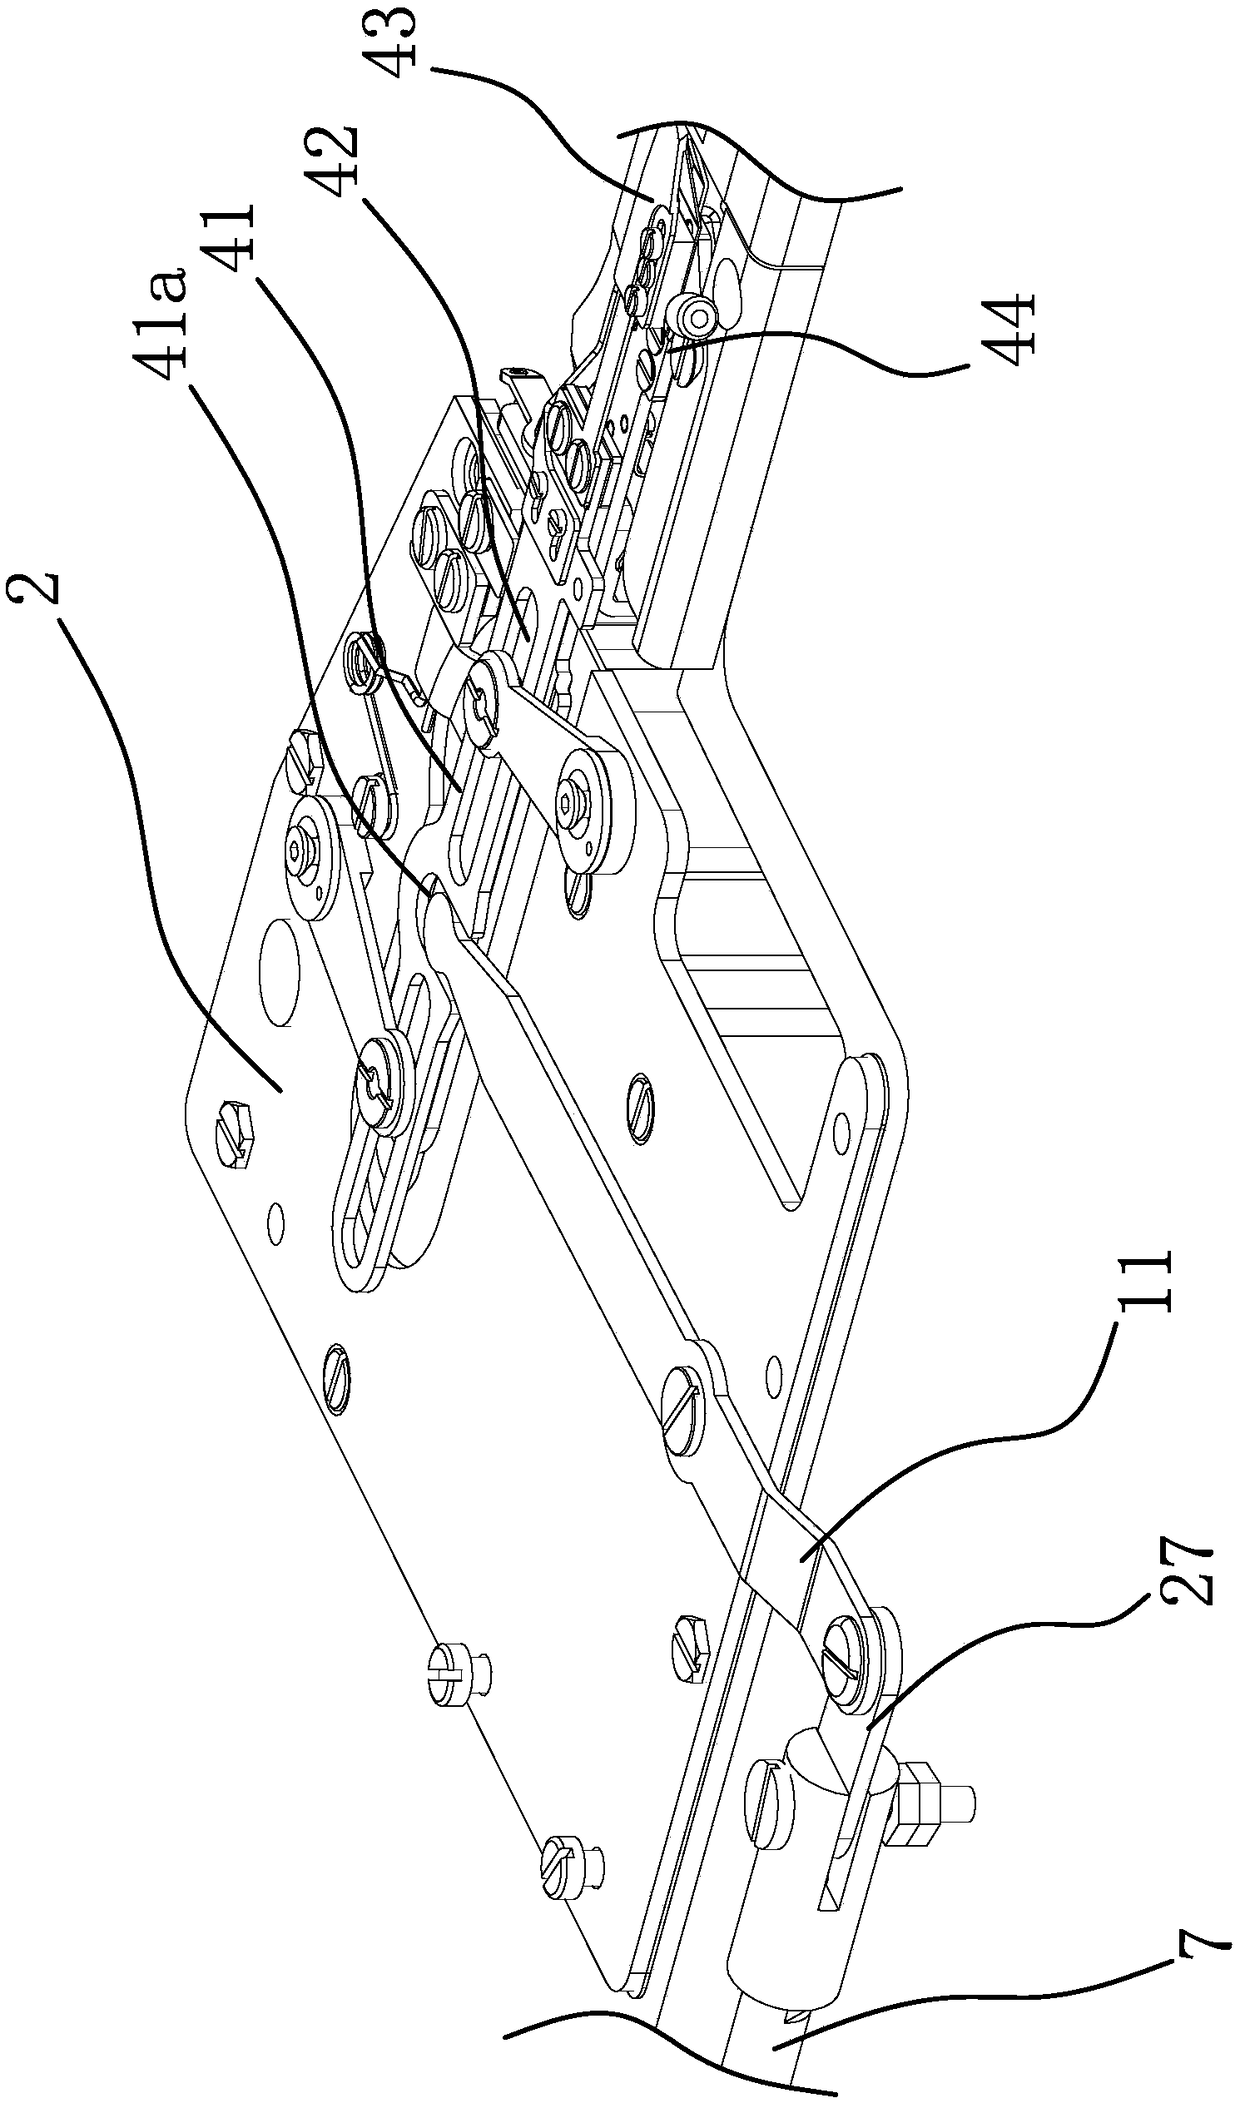 Control method of thread trimming and presser foot lifting device on sewing machine